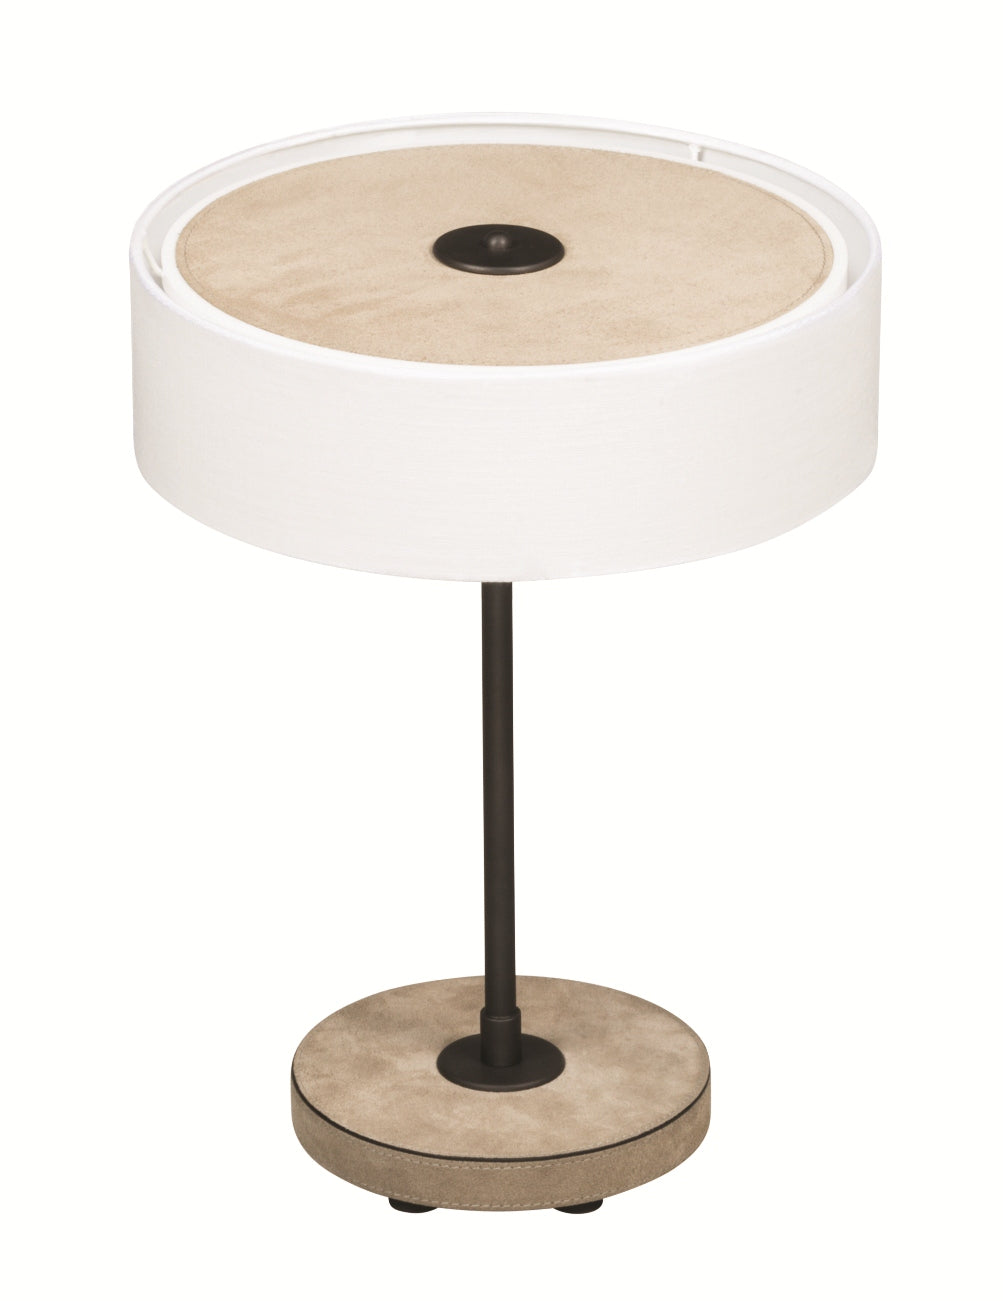 Fly Table Lamp by Giobagnara | Leather-Covered Wood Base with Fixed Brass Stem Available in Three Finishes | White Linen Lampshade with Fireproof Opaque Plexiglass Diffuser | A Blend of Elegance and Functionality | Exclusively at 2Jour Concierge, #1 luxury high-end gift & lifestyle shop